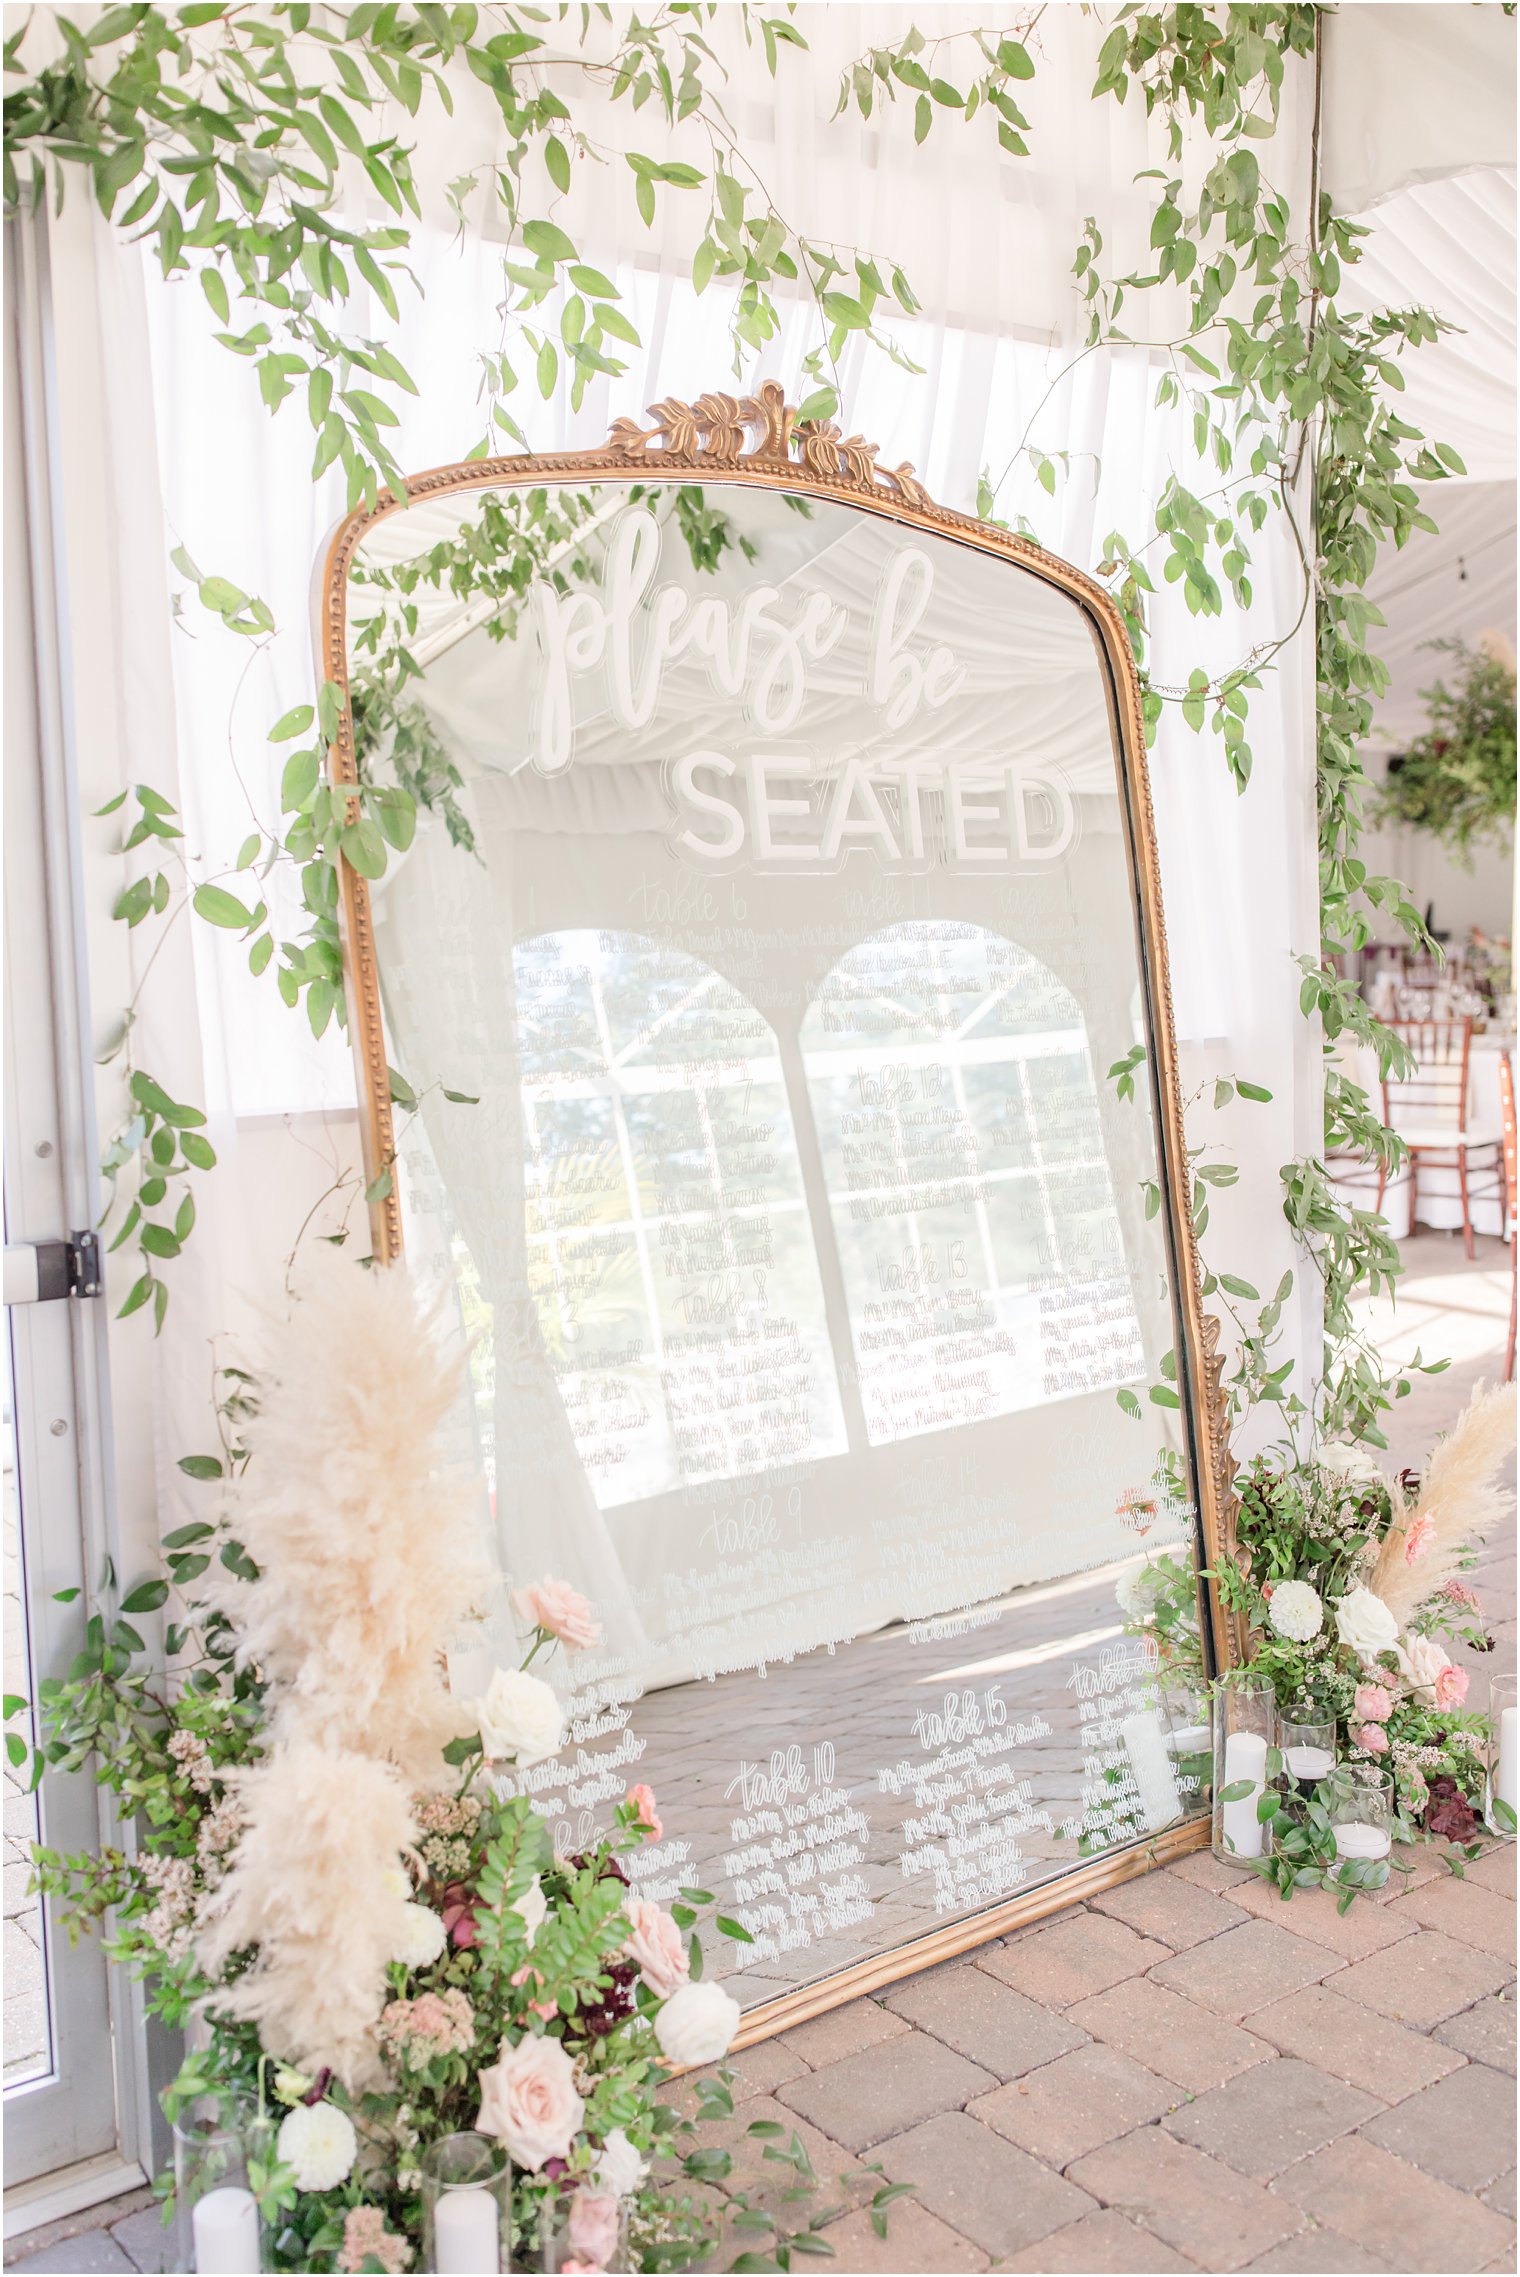 glass mirror seating chart for Windows on the Water at Frogbridge wedding reception